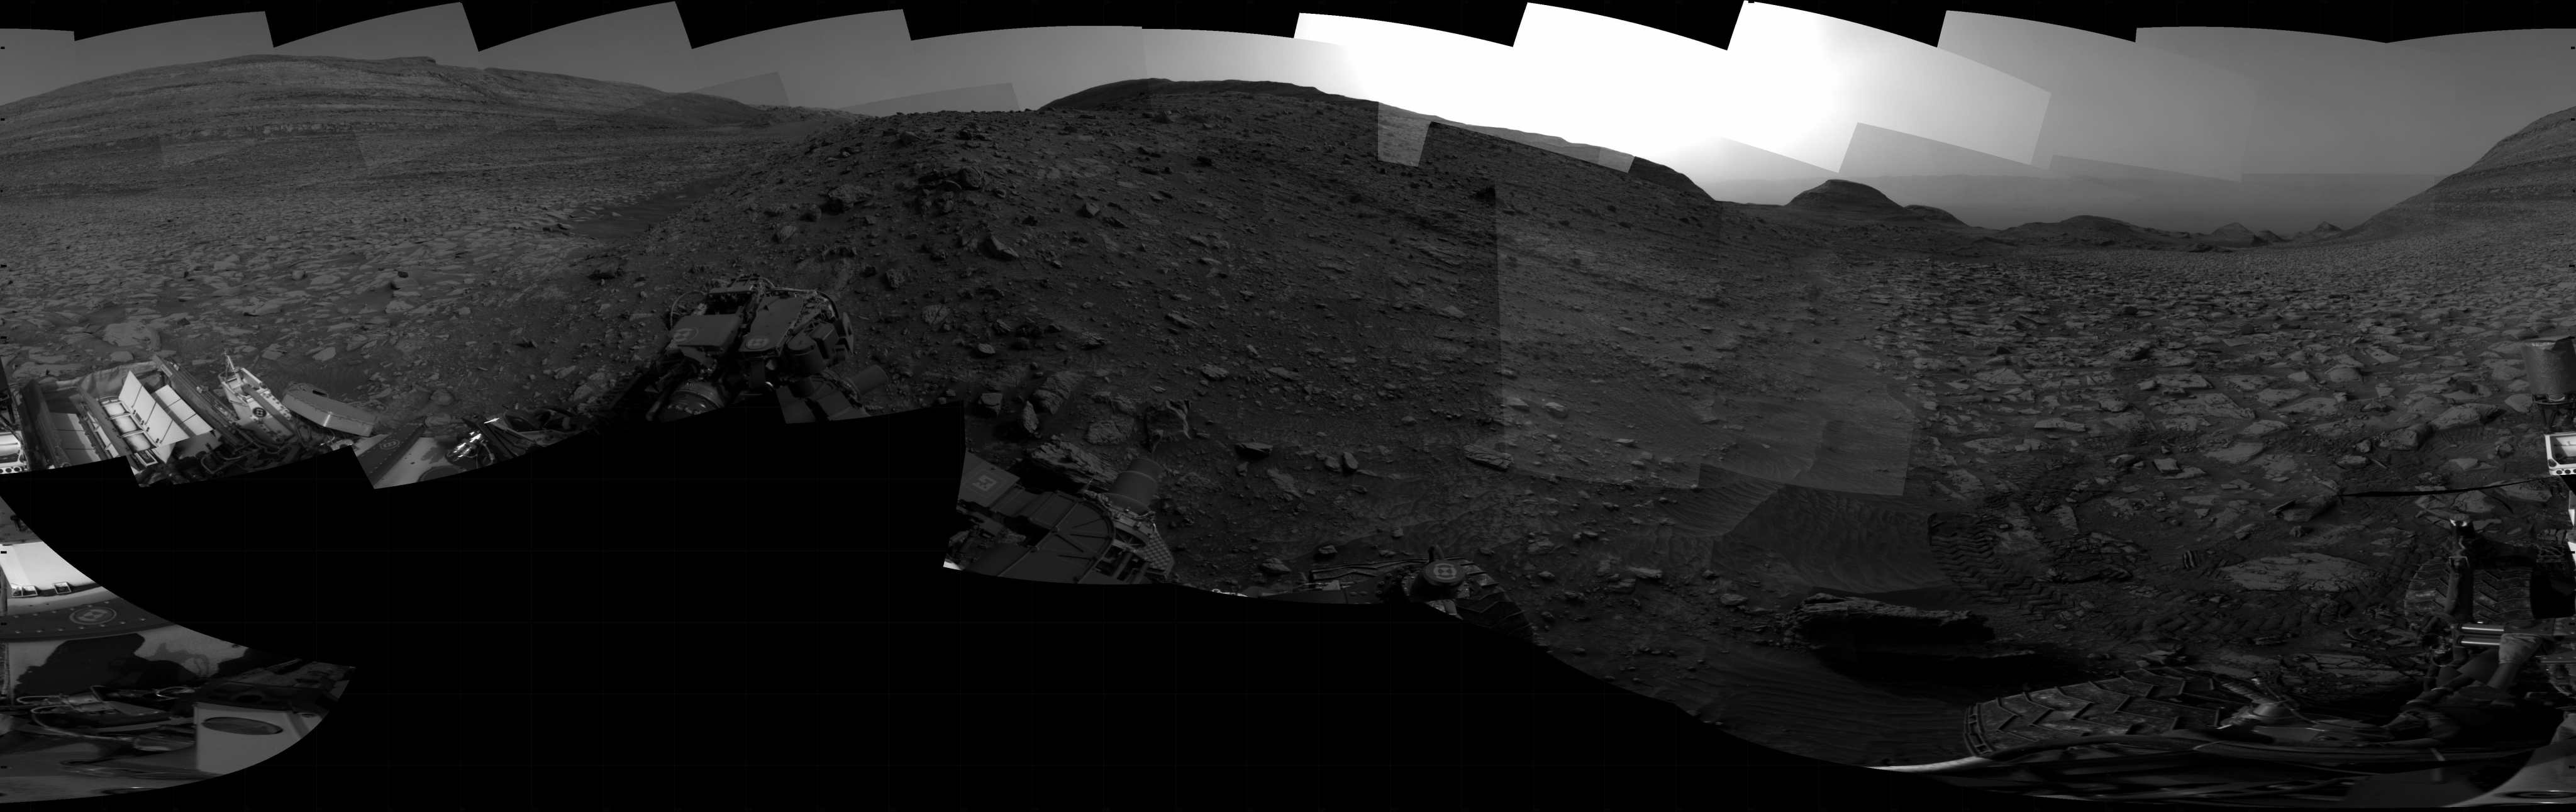 Curiosity took the images on April 29, 2024, Sol 4169 of the Mars Science Laboratory mission at drive 0, site number 107. The local mean solar time for the image exposures was from 3 PM to 4 PM.